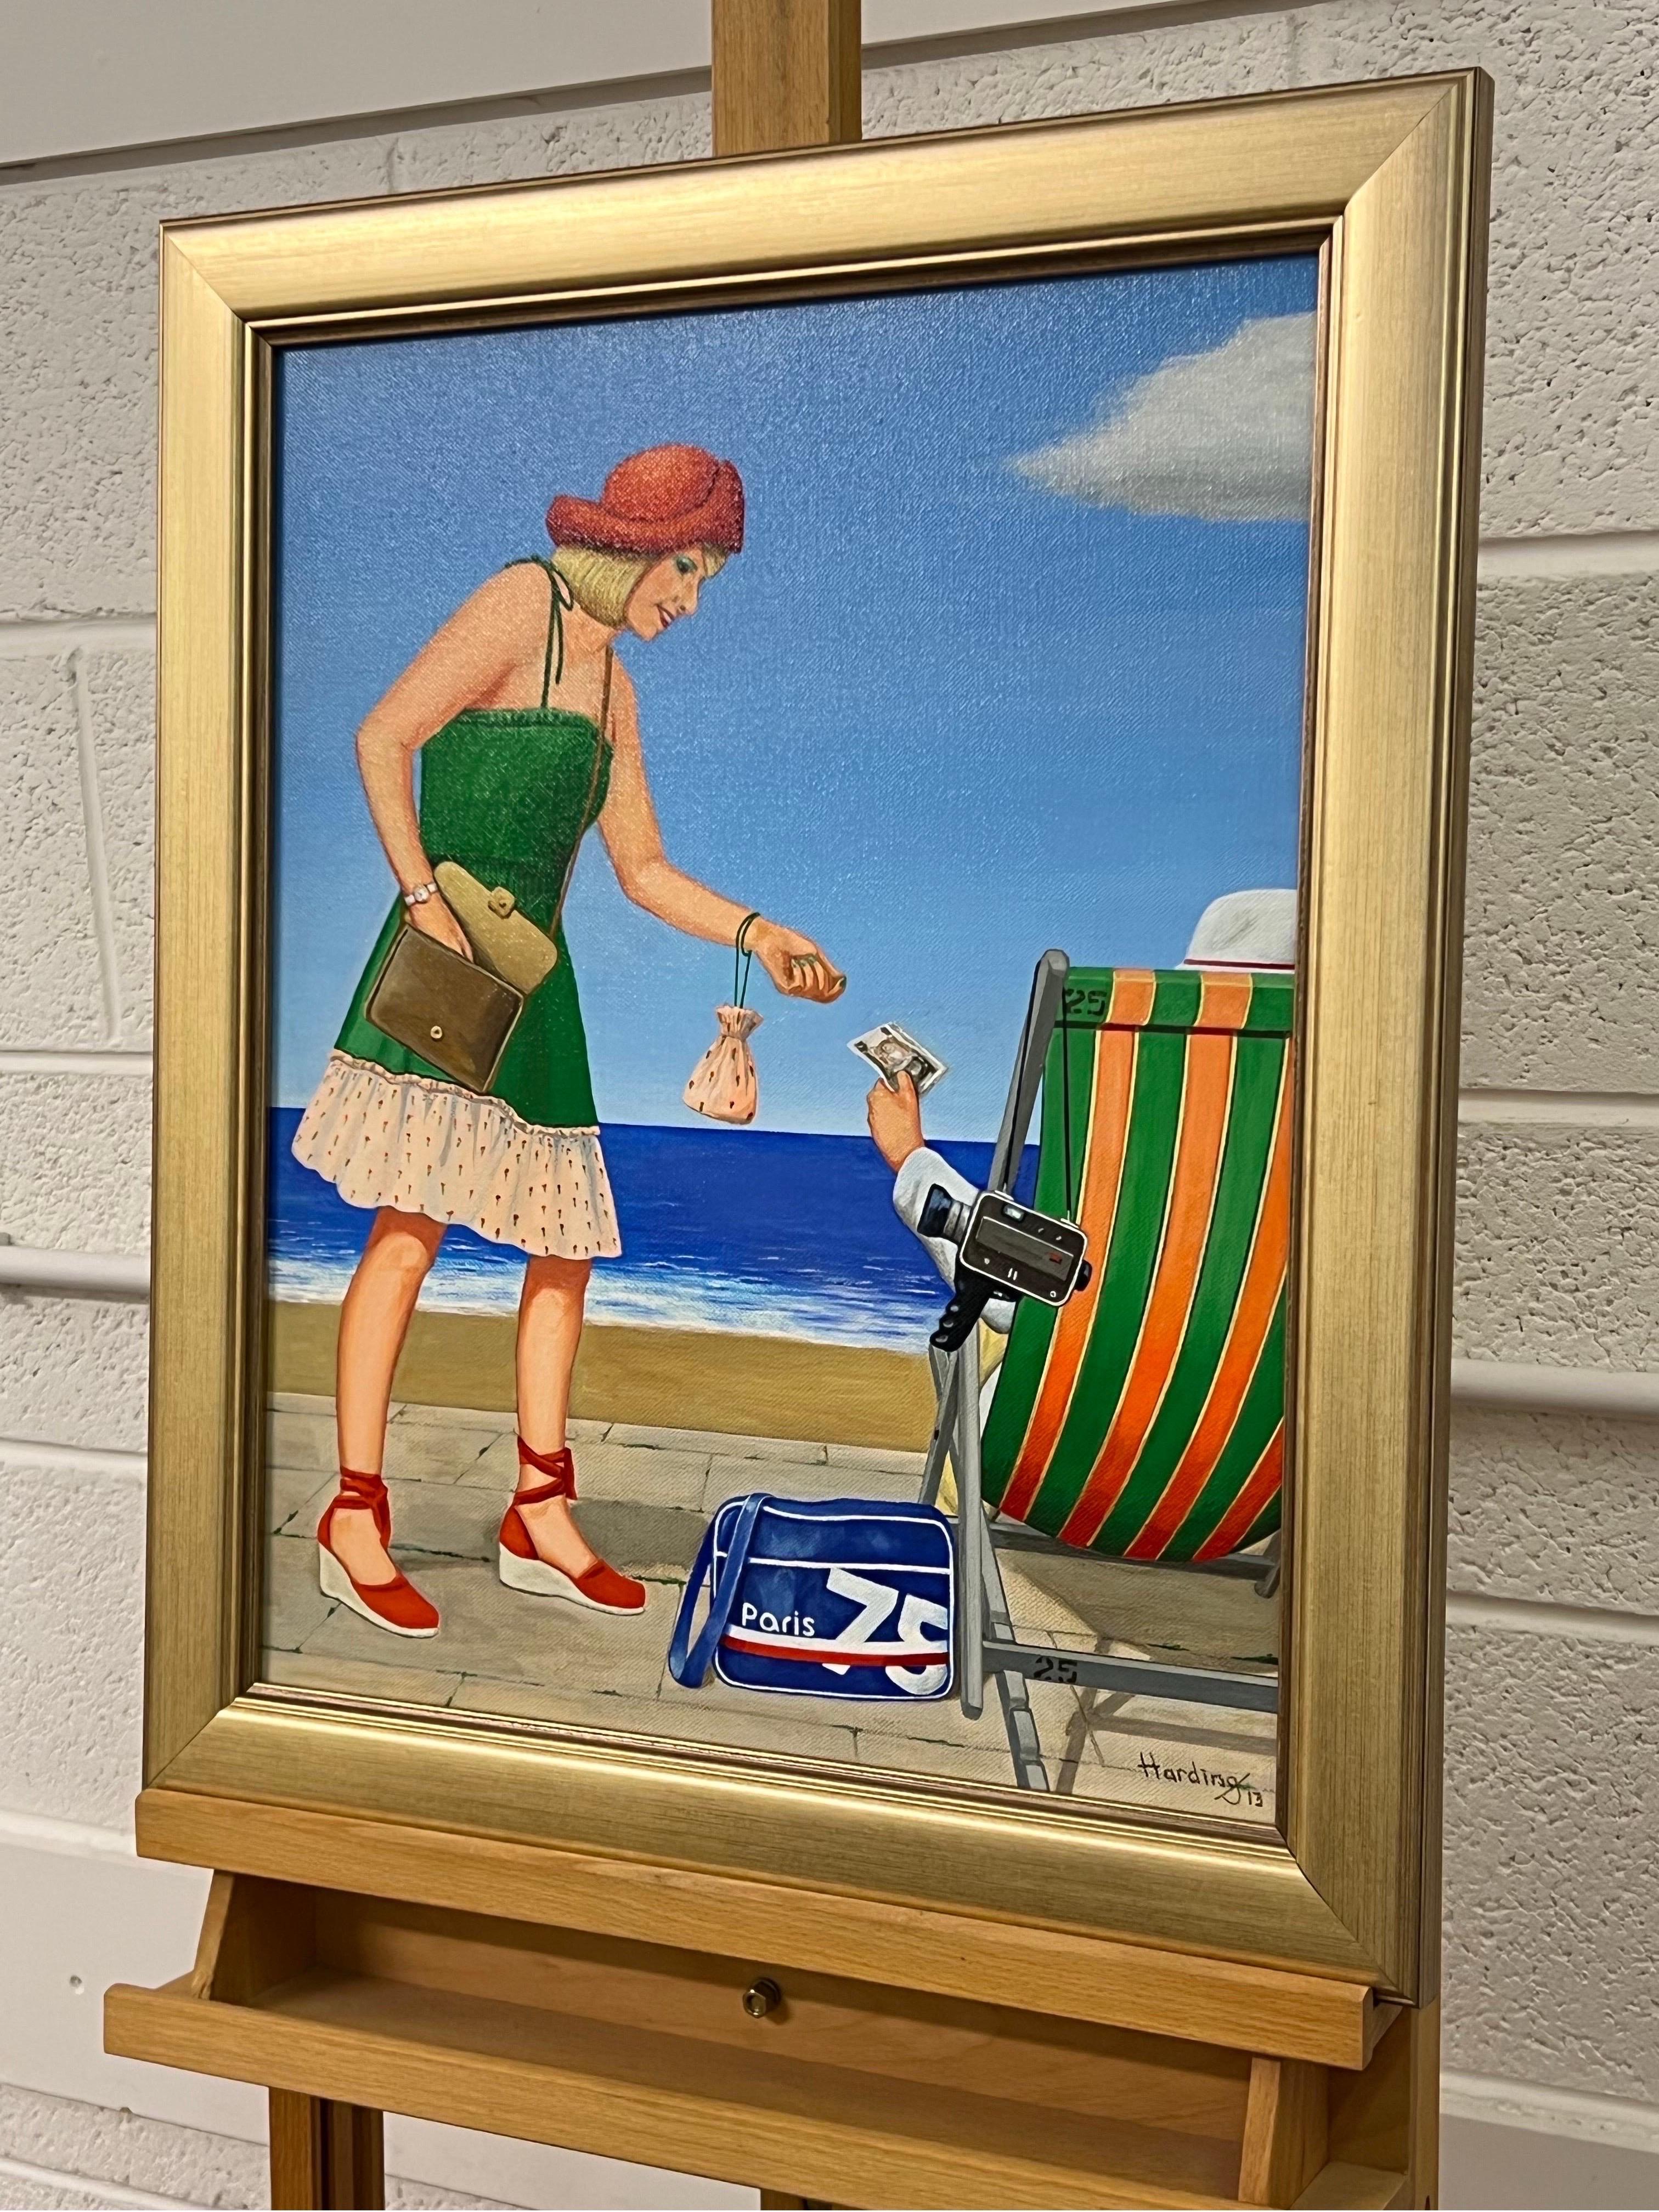 Vintage English Woman at a Seaside Beach Resort in Summer 1960's 1970's England entitled 'Summer Collection 1' by Retro Nostalgic Artist, Paul F Harding. Signed, Original, Oil on Canvas. Presented in a gold frame.

Art measures 16 x 20 inches
Frame